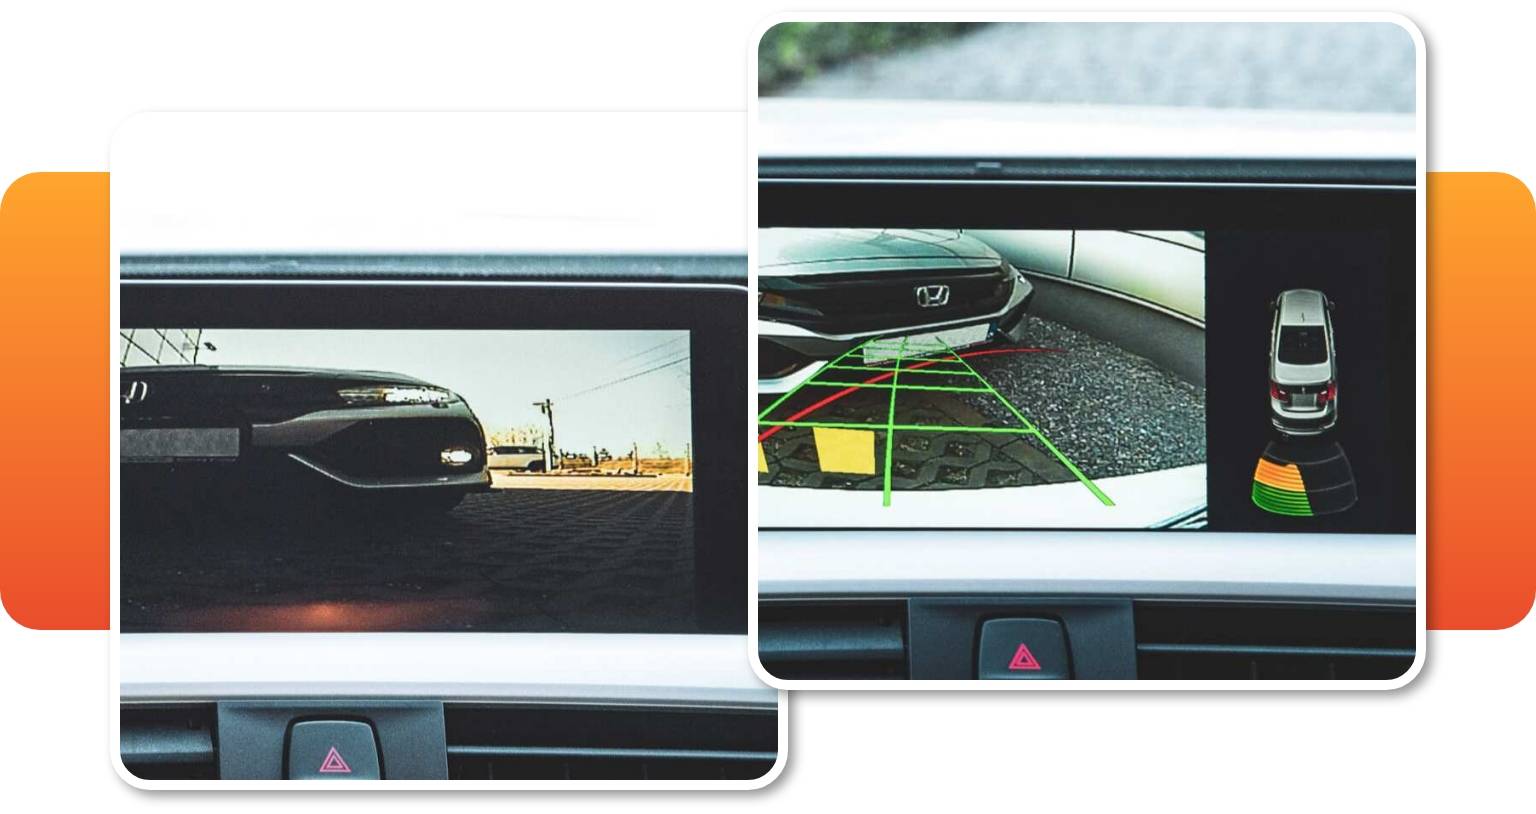 MMI Prime integration with front and rear view cameras